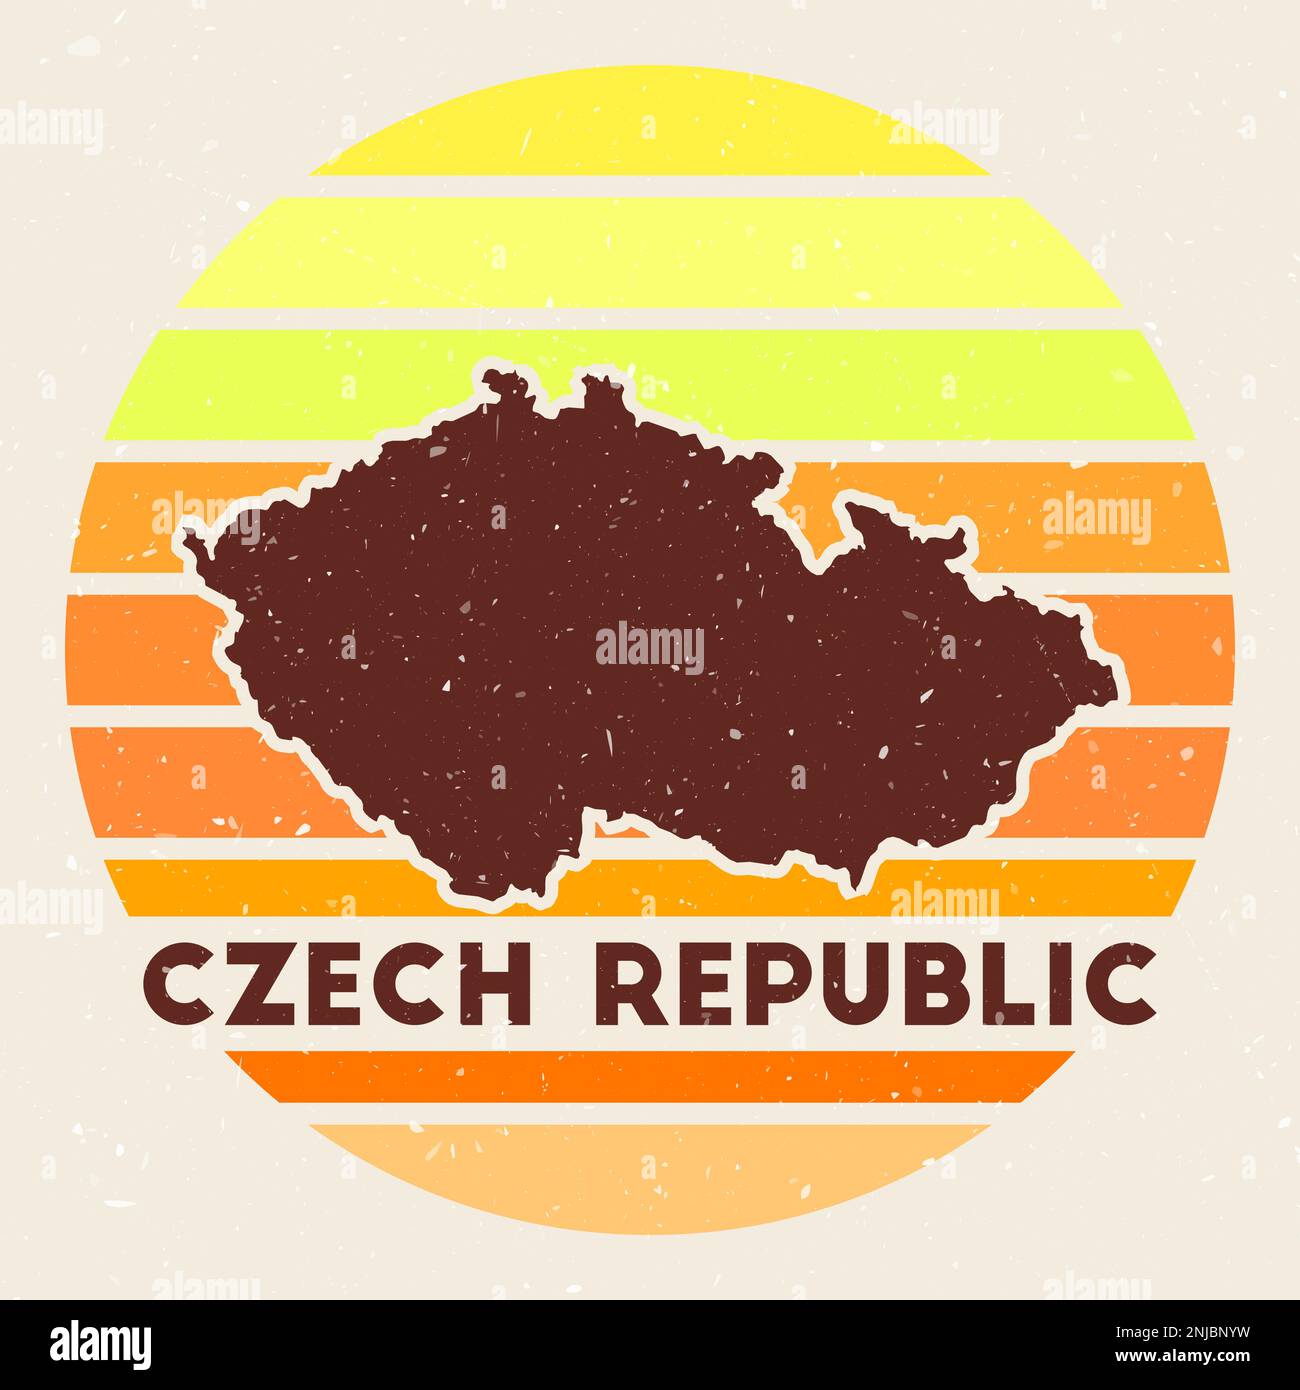 Czech Republic logo. Sign with the map of country and colored stripes, vector illustration. Can be used as insignia, logotype, label, sticker or badge Stock Vector